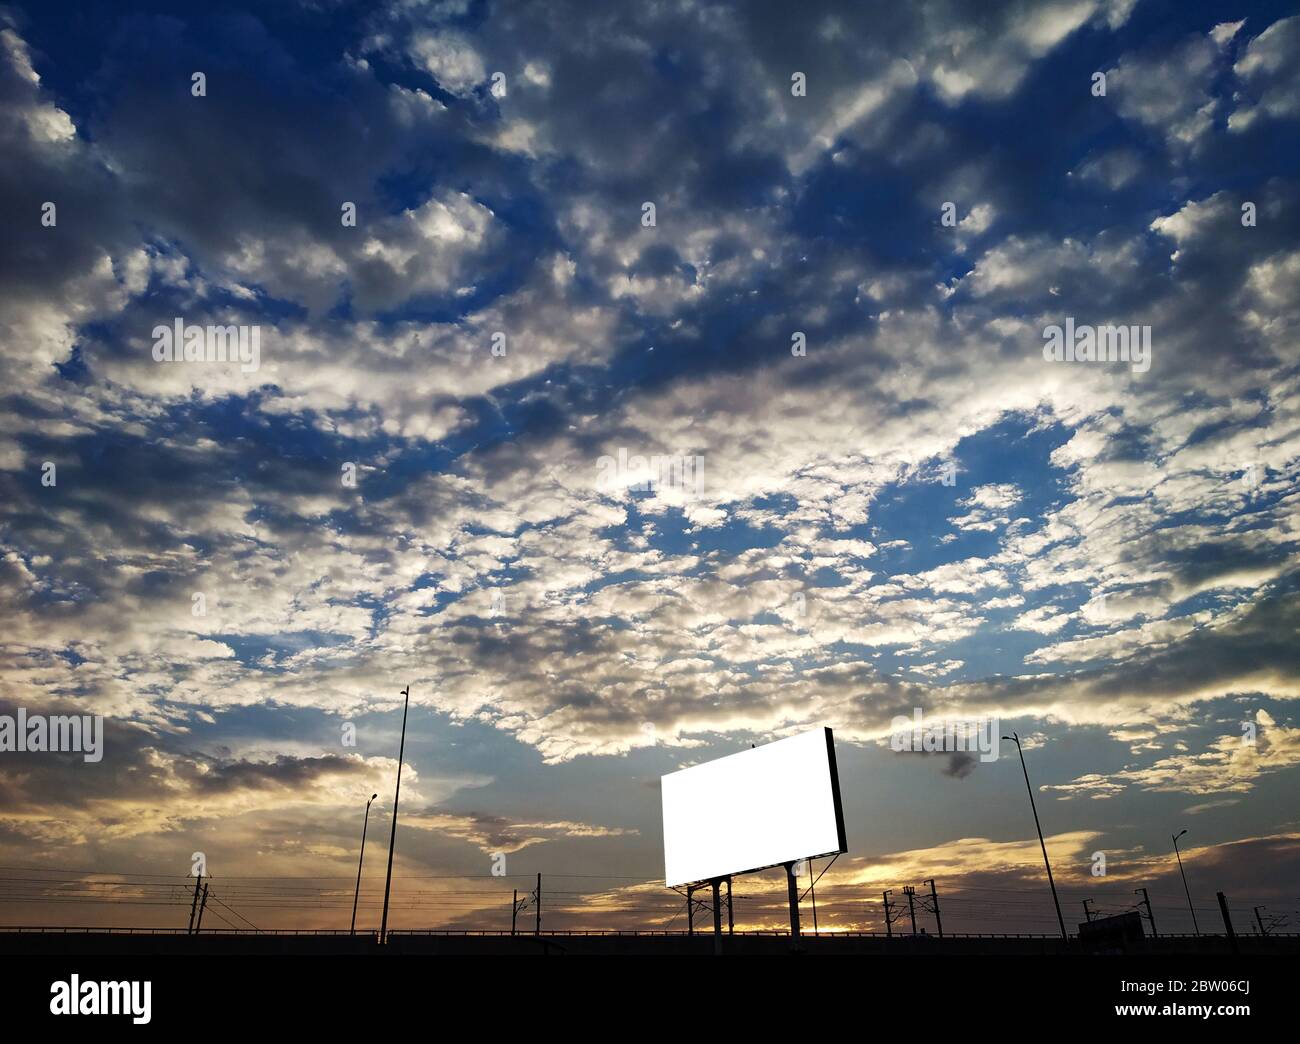 Dramatic cloudy sky natural background and advertising billboard Stock Photo